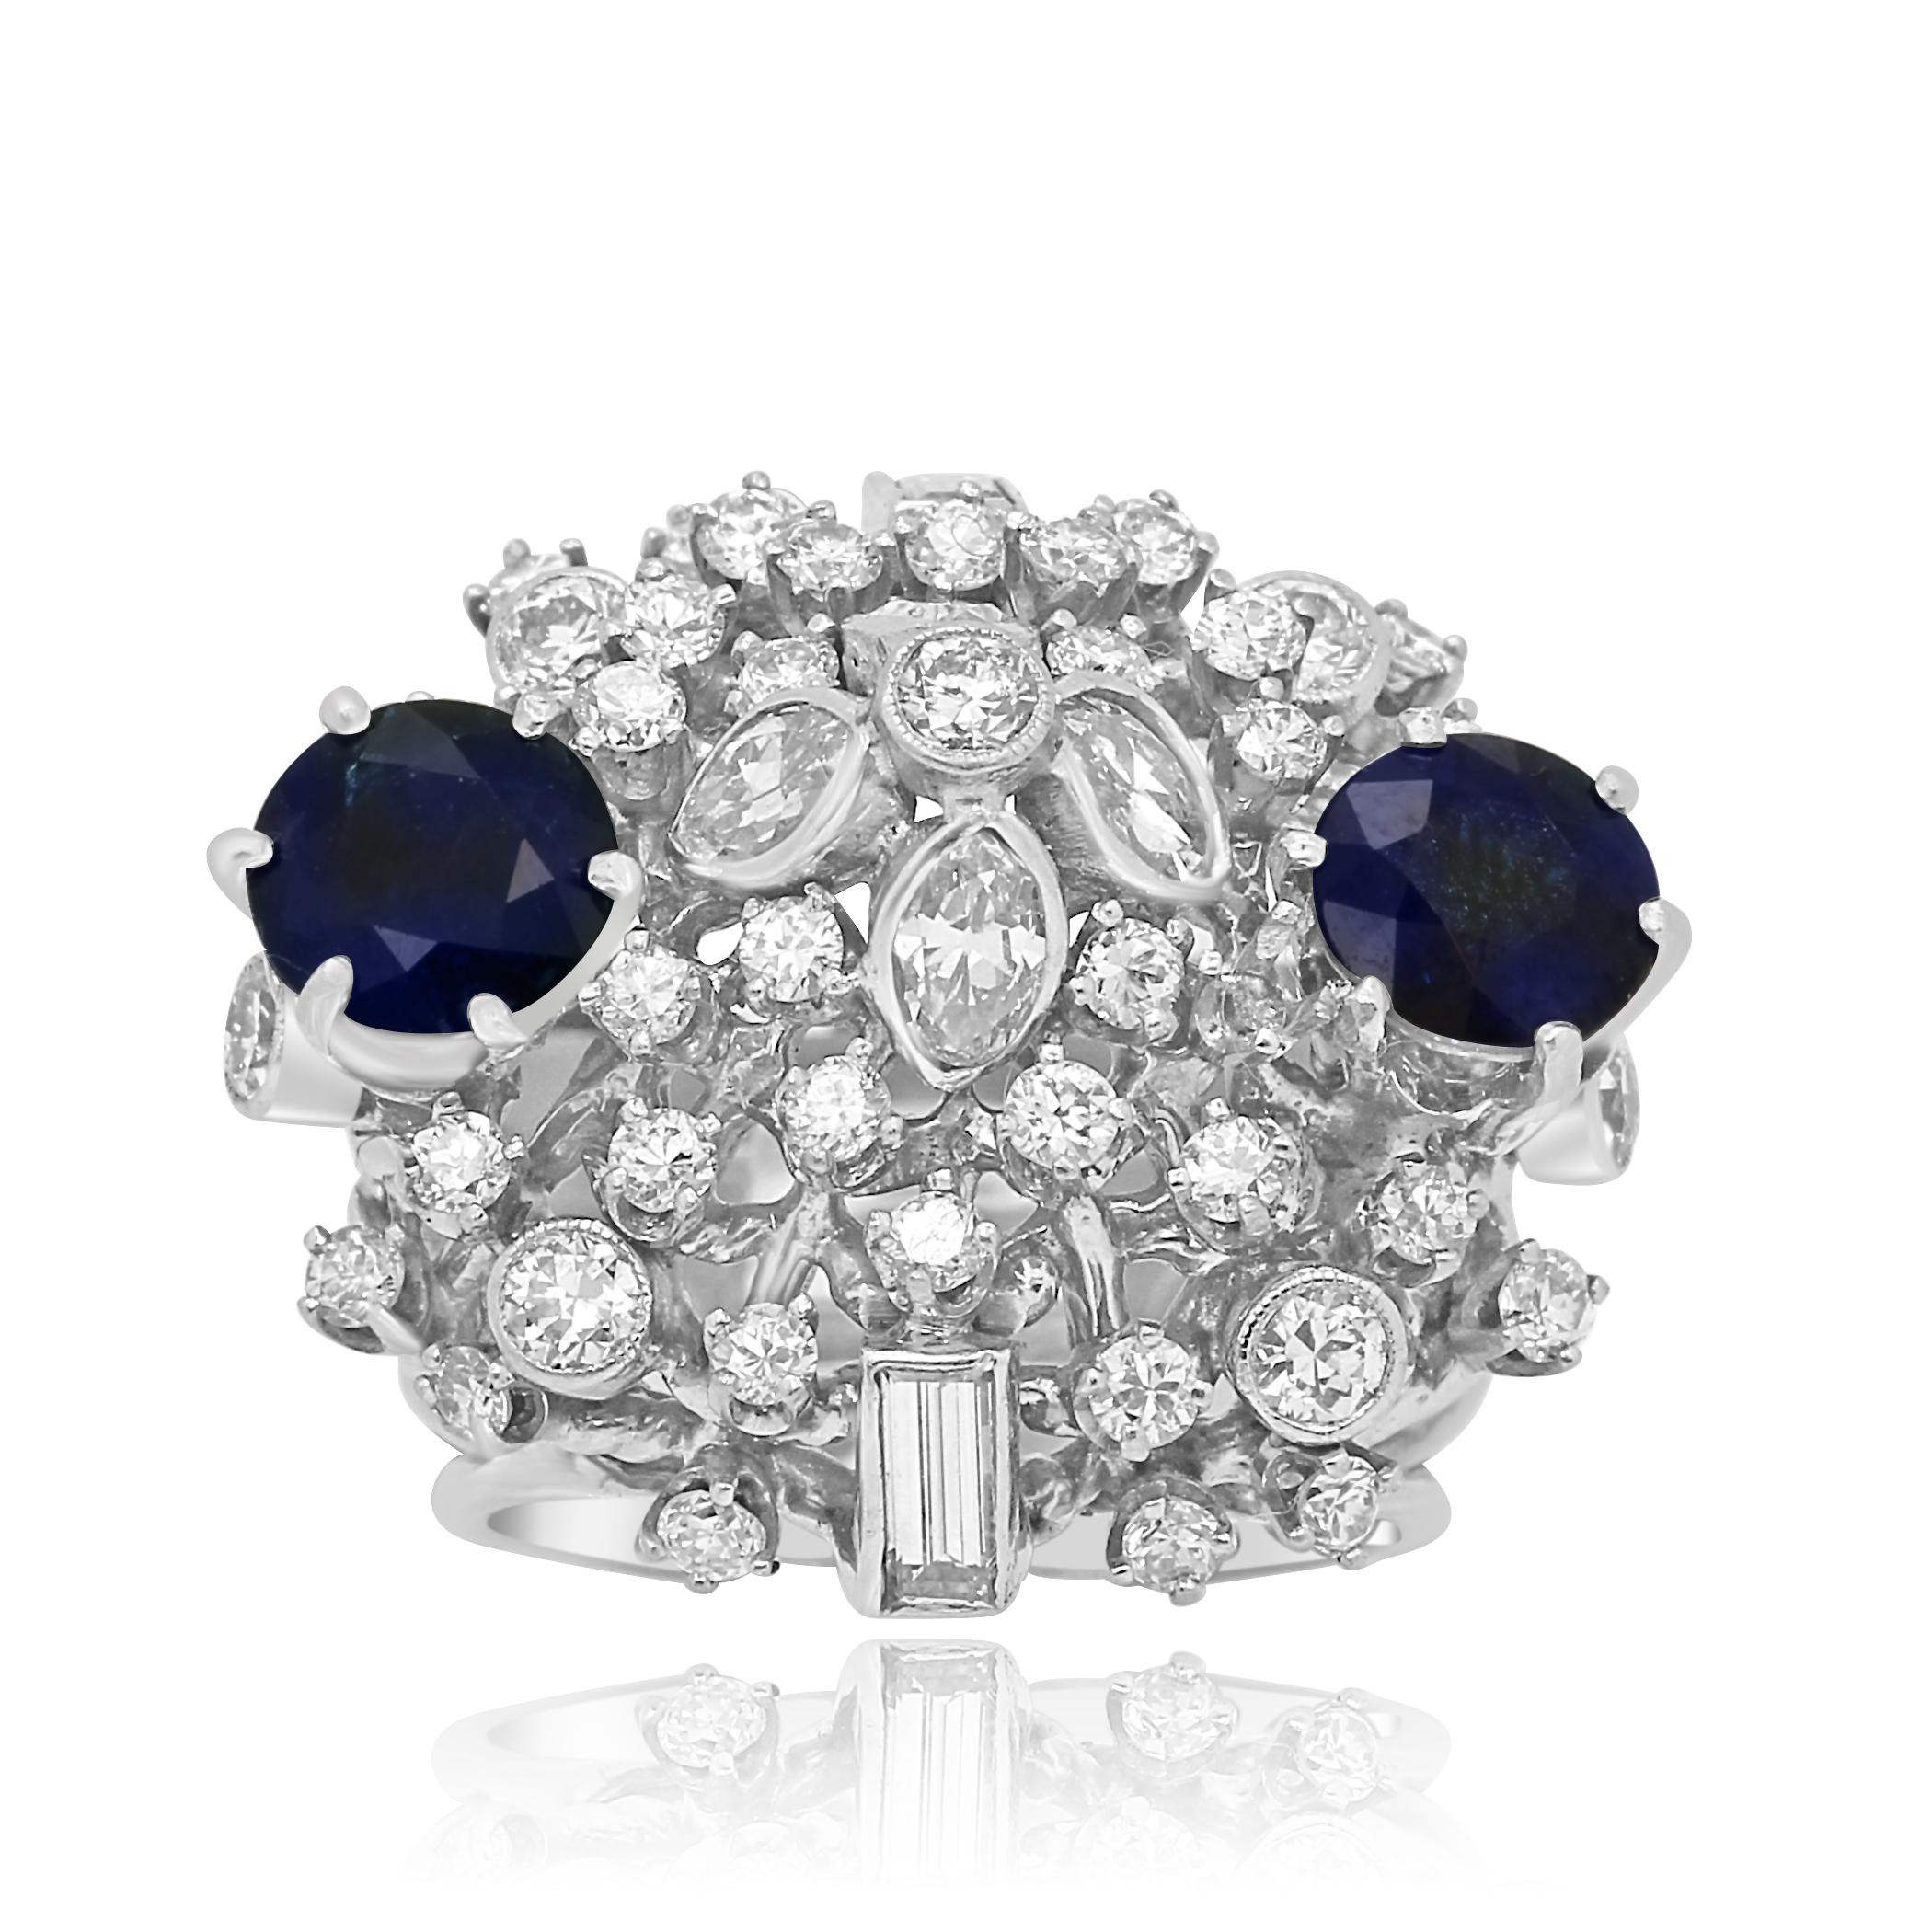 2 Blue Sapphire Round Approximate Weight 2.00 Carat with White Marquis, Baguettes and round diamonds approximate weight 2.10 carats in Platinum Hand Made one of a kind Ring.

Approximate Blue Sapphire Weight 2.00 Carat
Approximate Total Weight 4.10